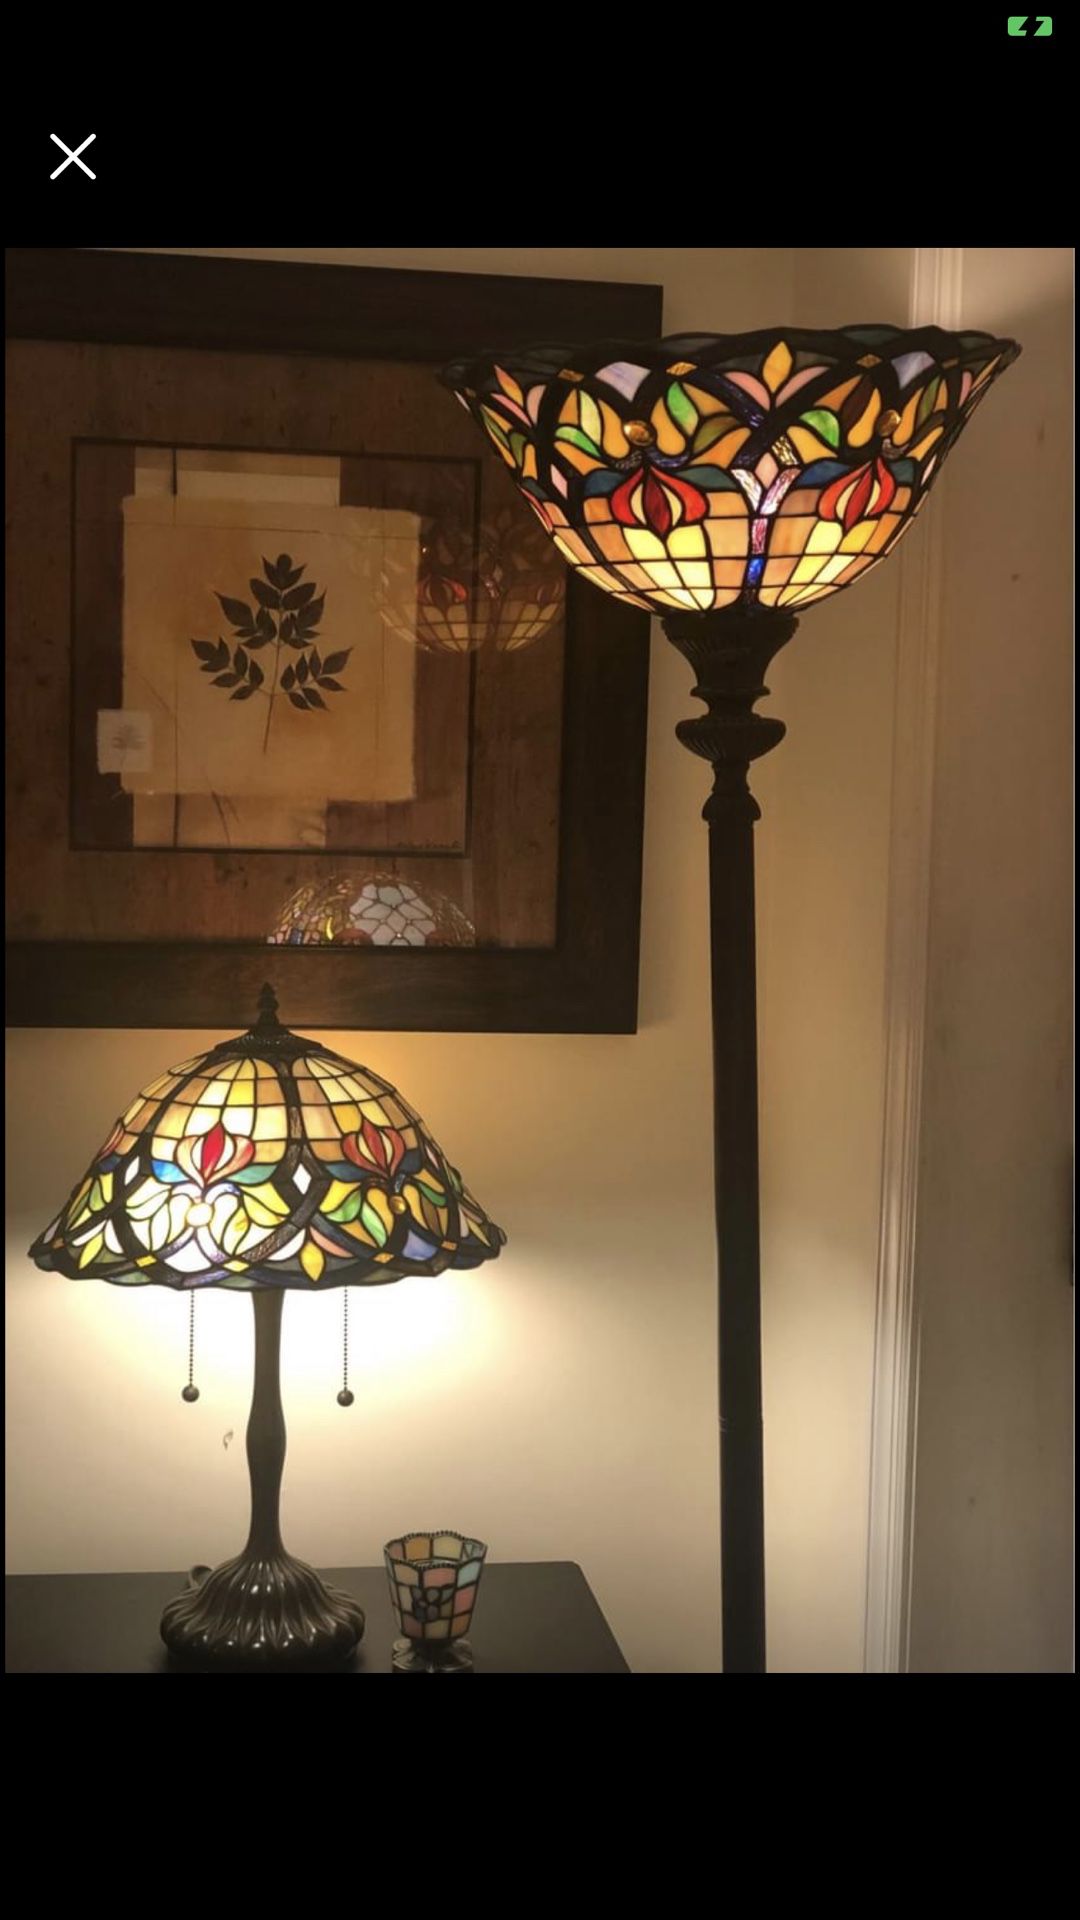 Set of Lamps